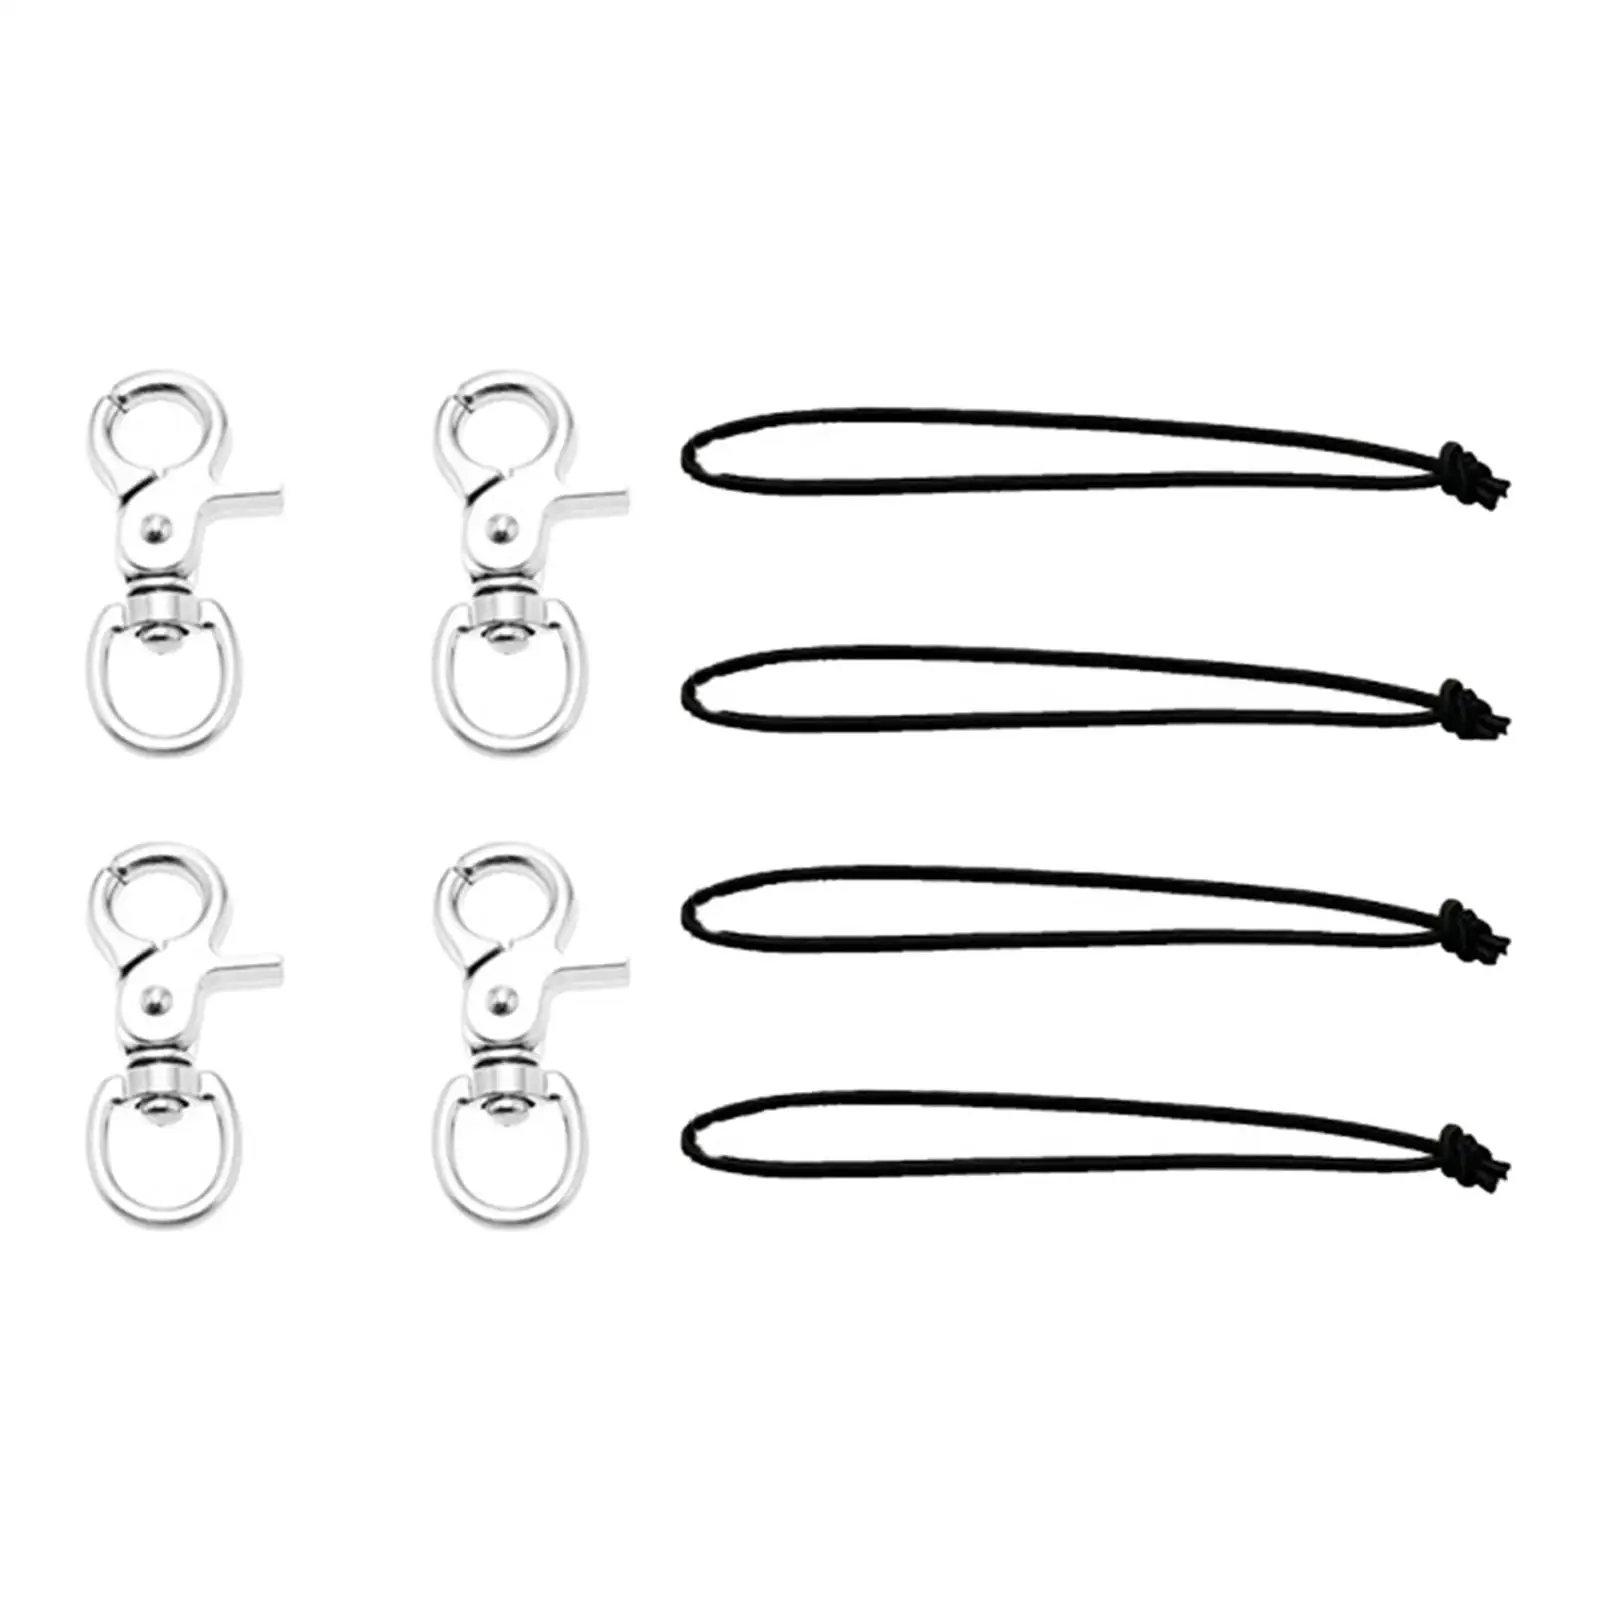 4x Practical Snowboard Leash Cord Snowboard Bindings Replacement Connecting Rope for Camping Beginners Window Curtain Survival